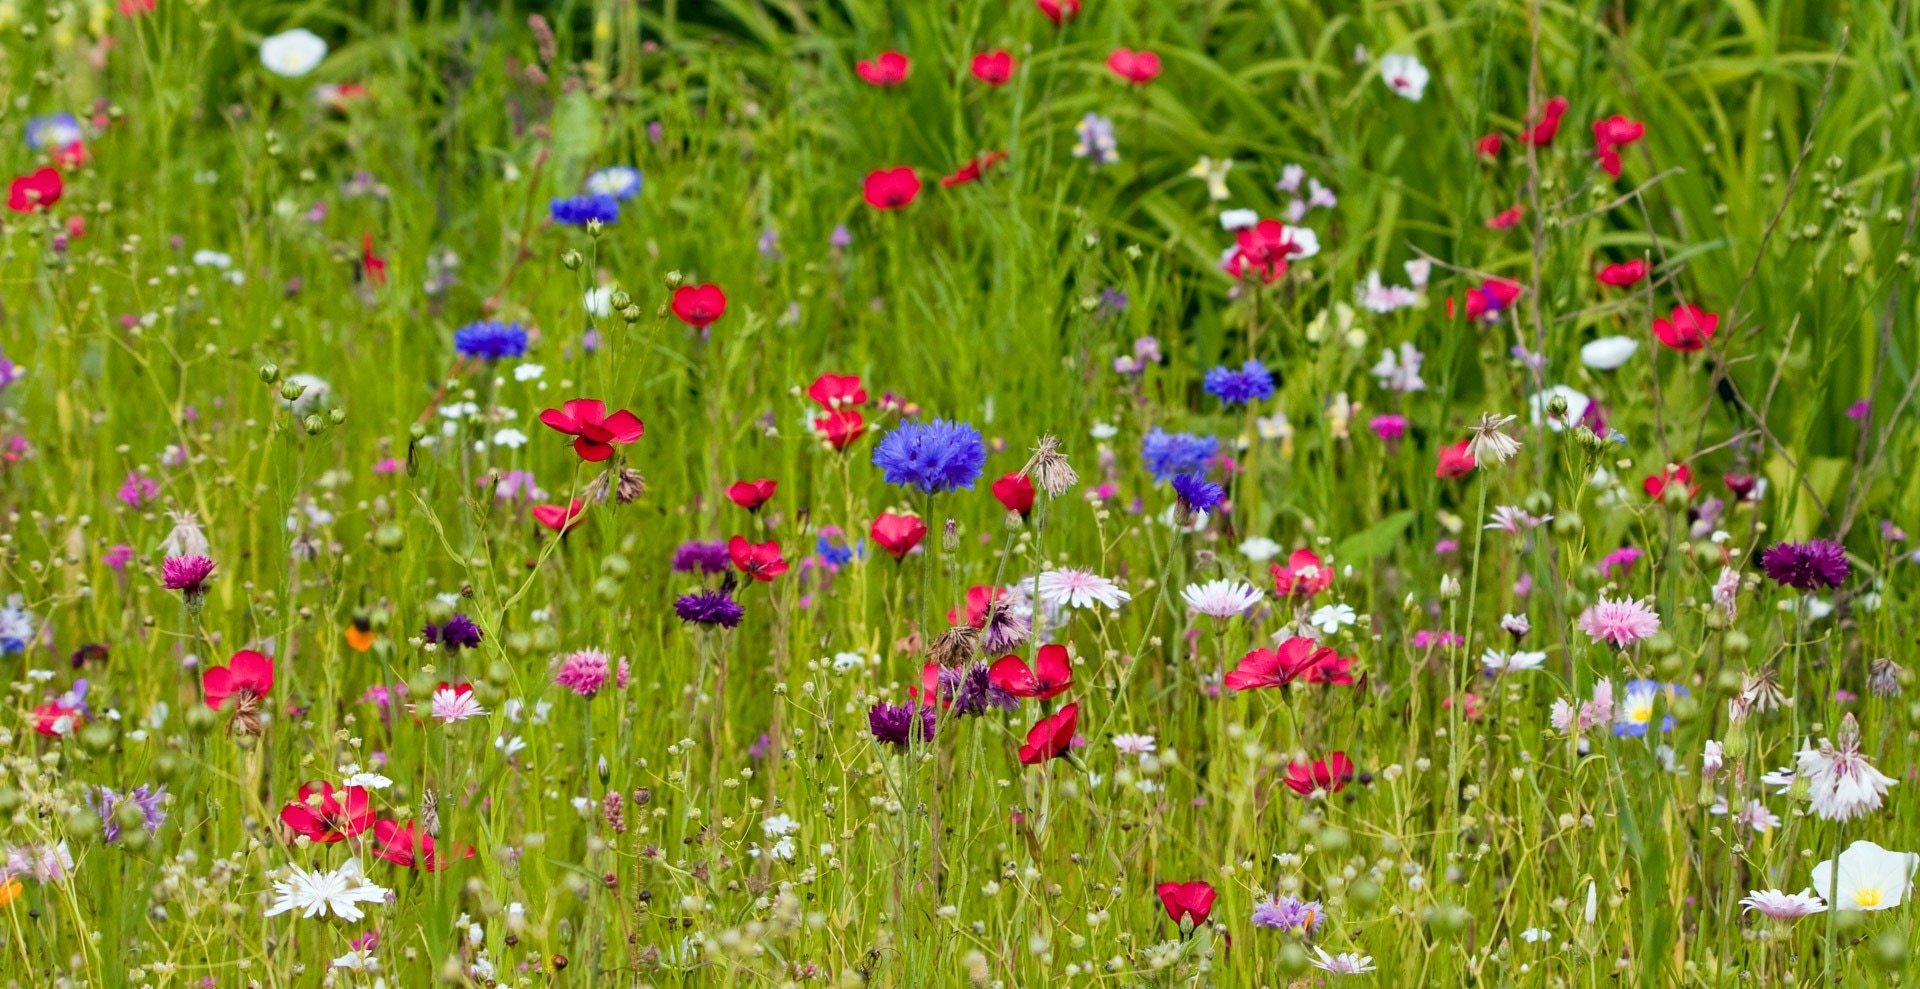 red poppies with blue cornflowers